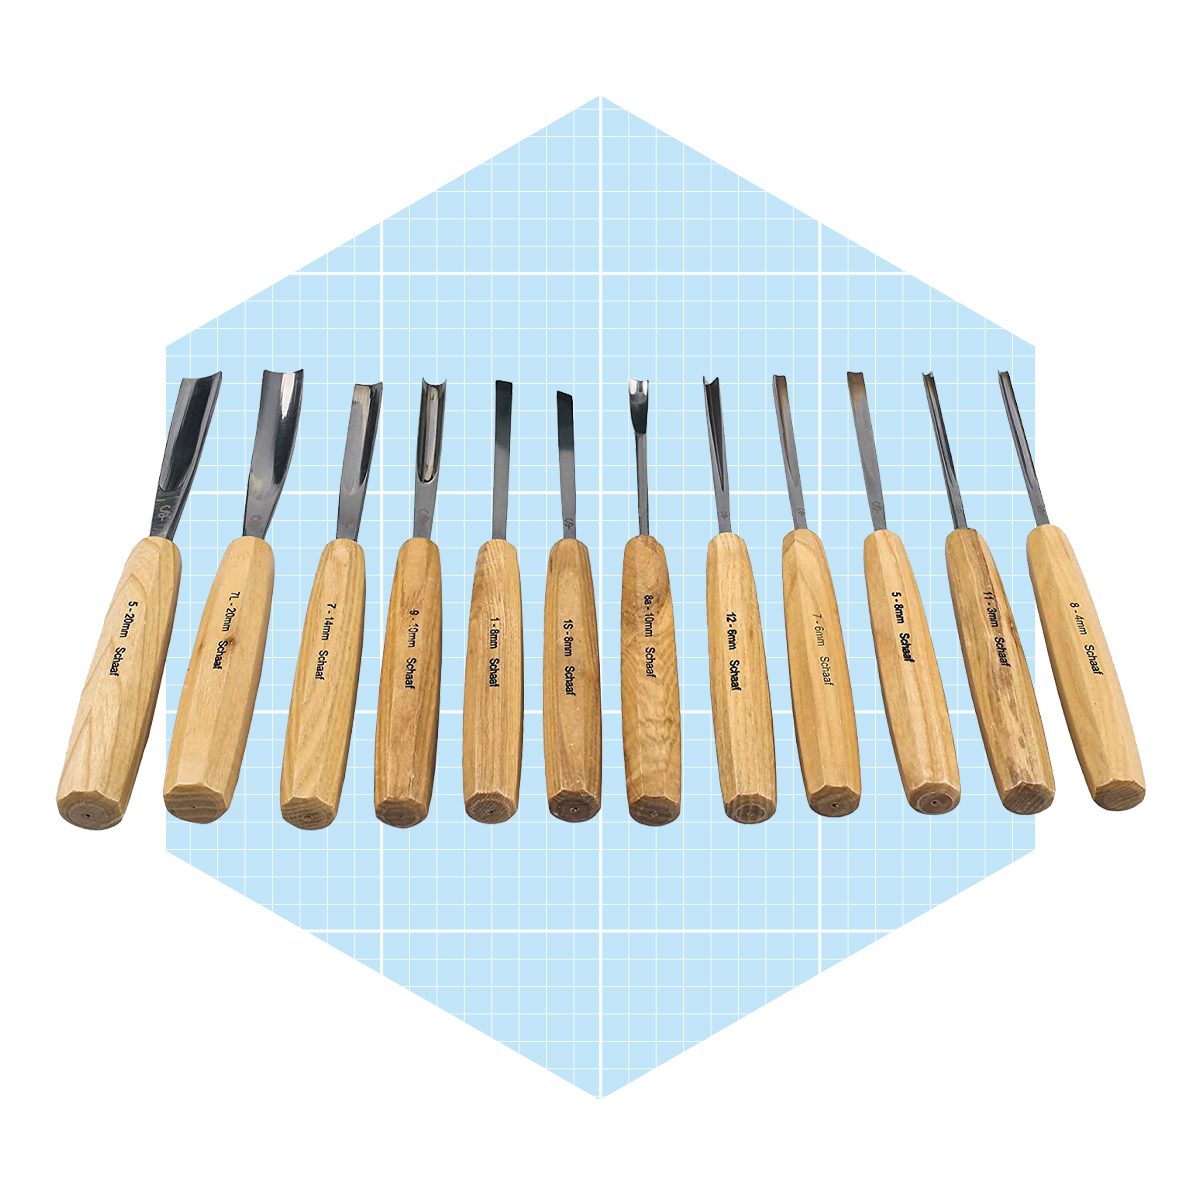 Schaaf Wood Carving Tools 12-pc Wood Chisel Set with Canvas Case